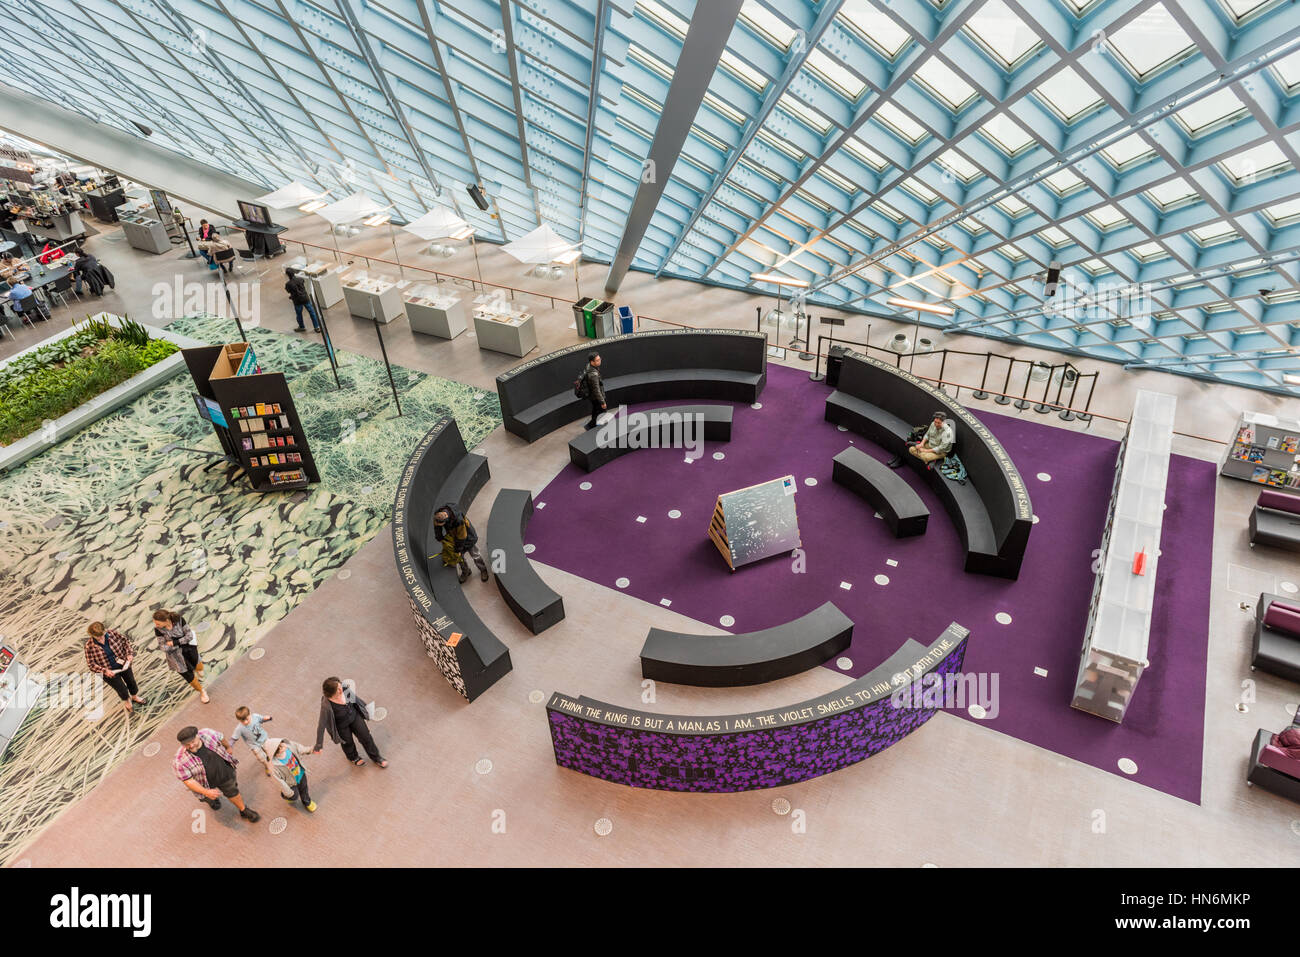 Seattle, USA - April 15, 2016: Aerial view of main floor of the public Central Library with modern glass architecture Stock Photo